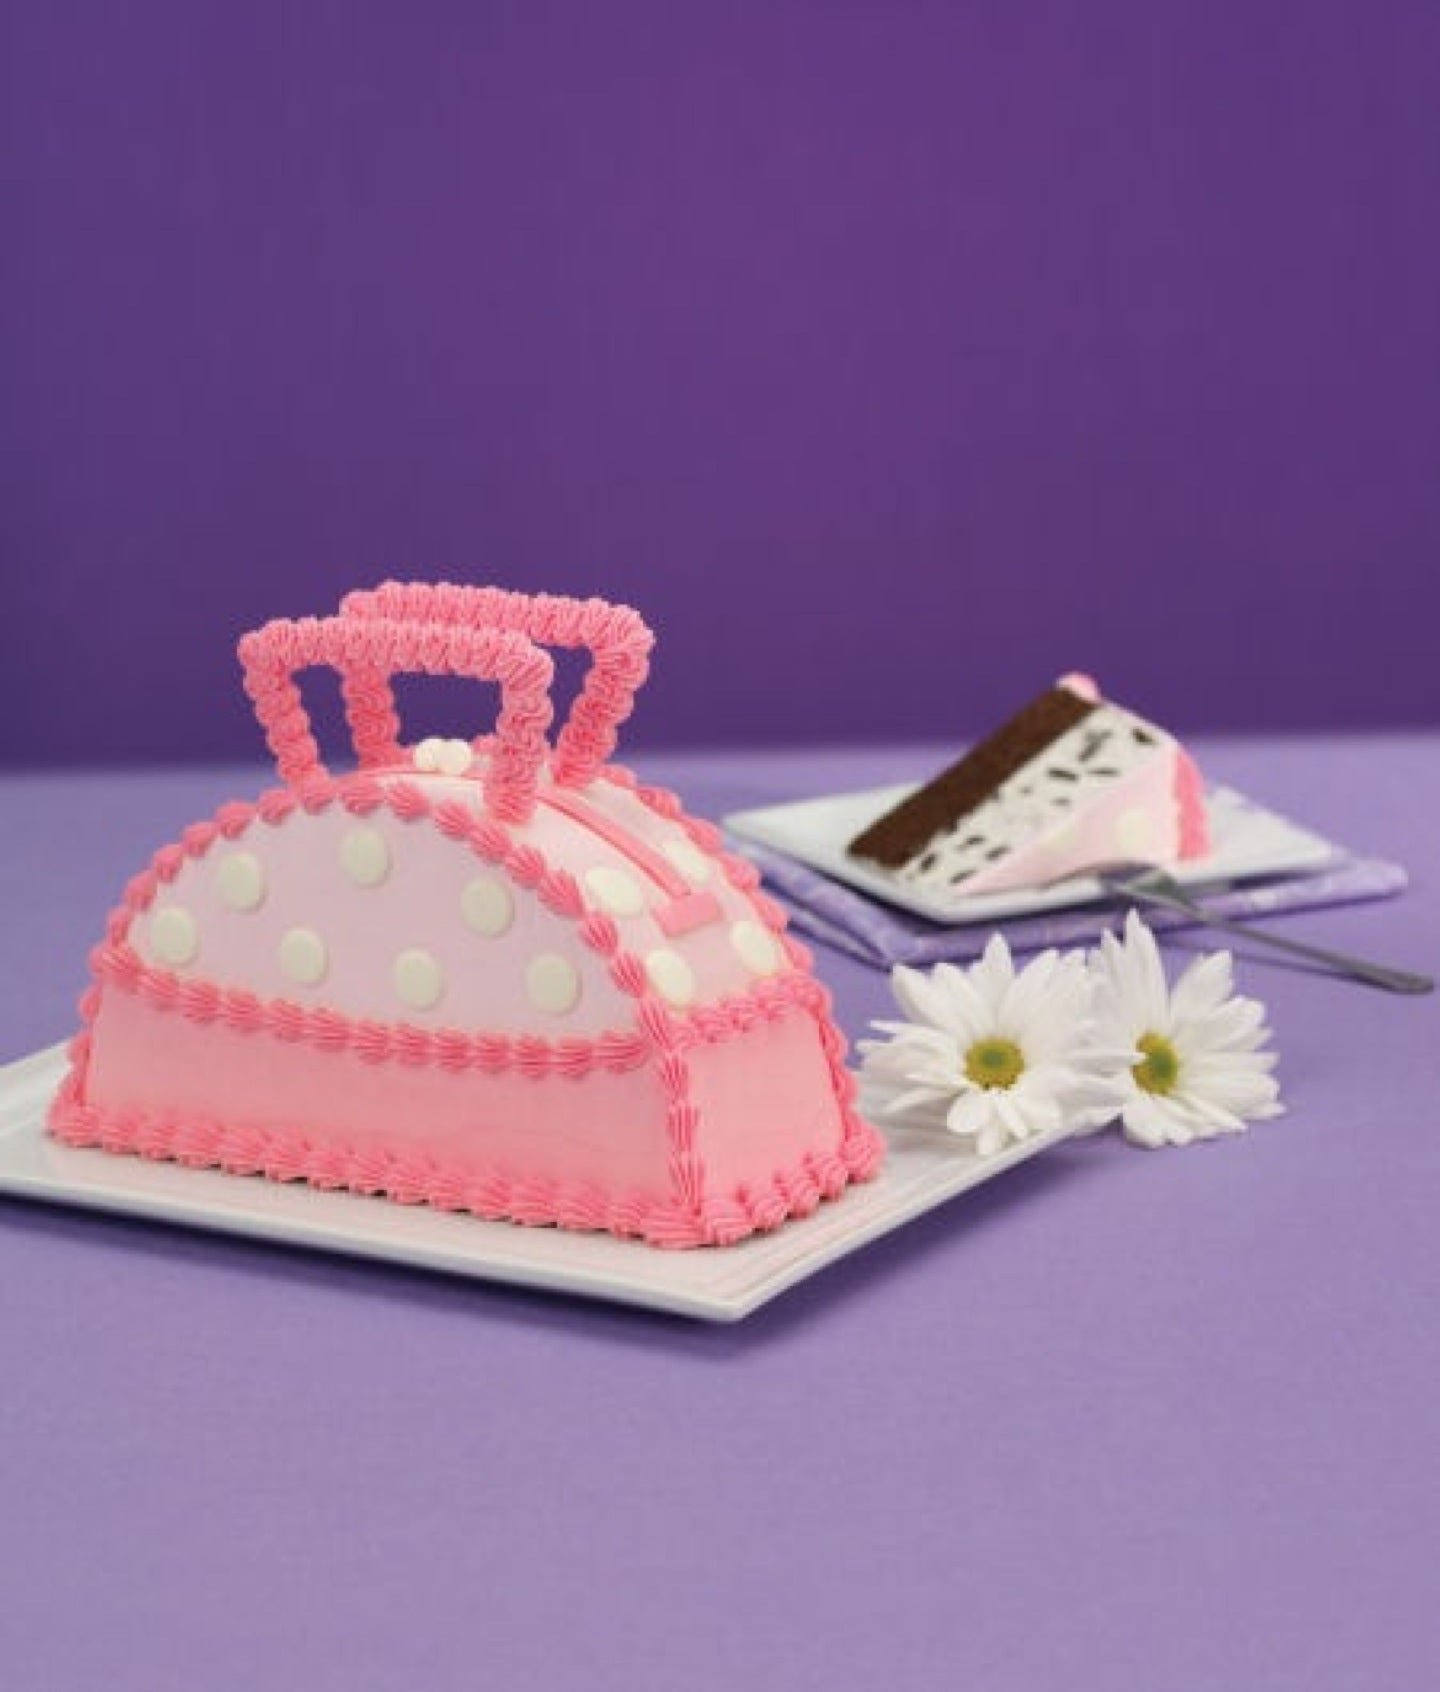 Baskin-Robbins - Which cake will you say, 